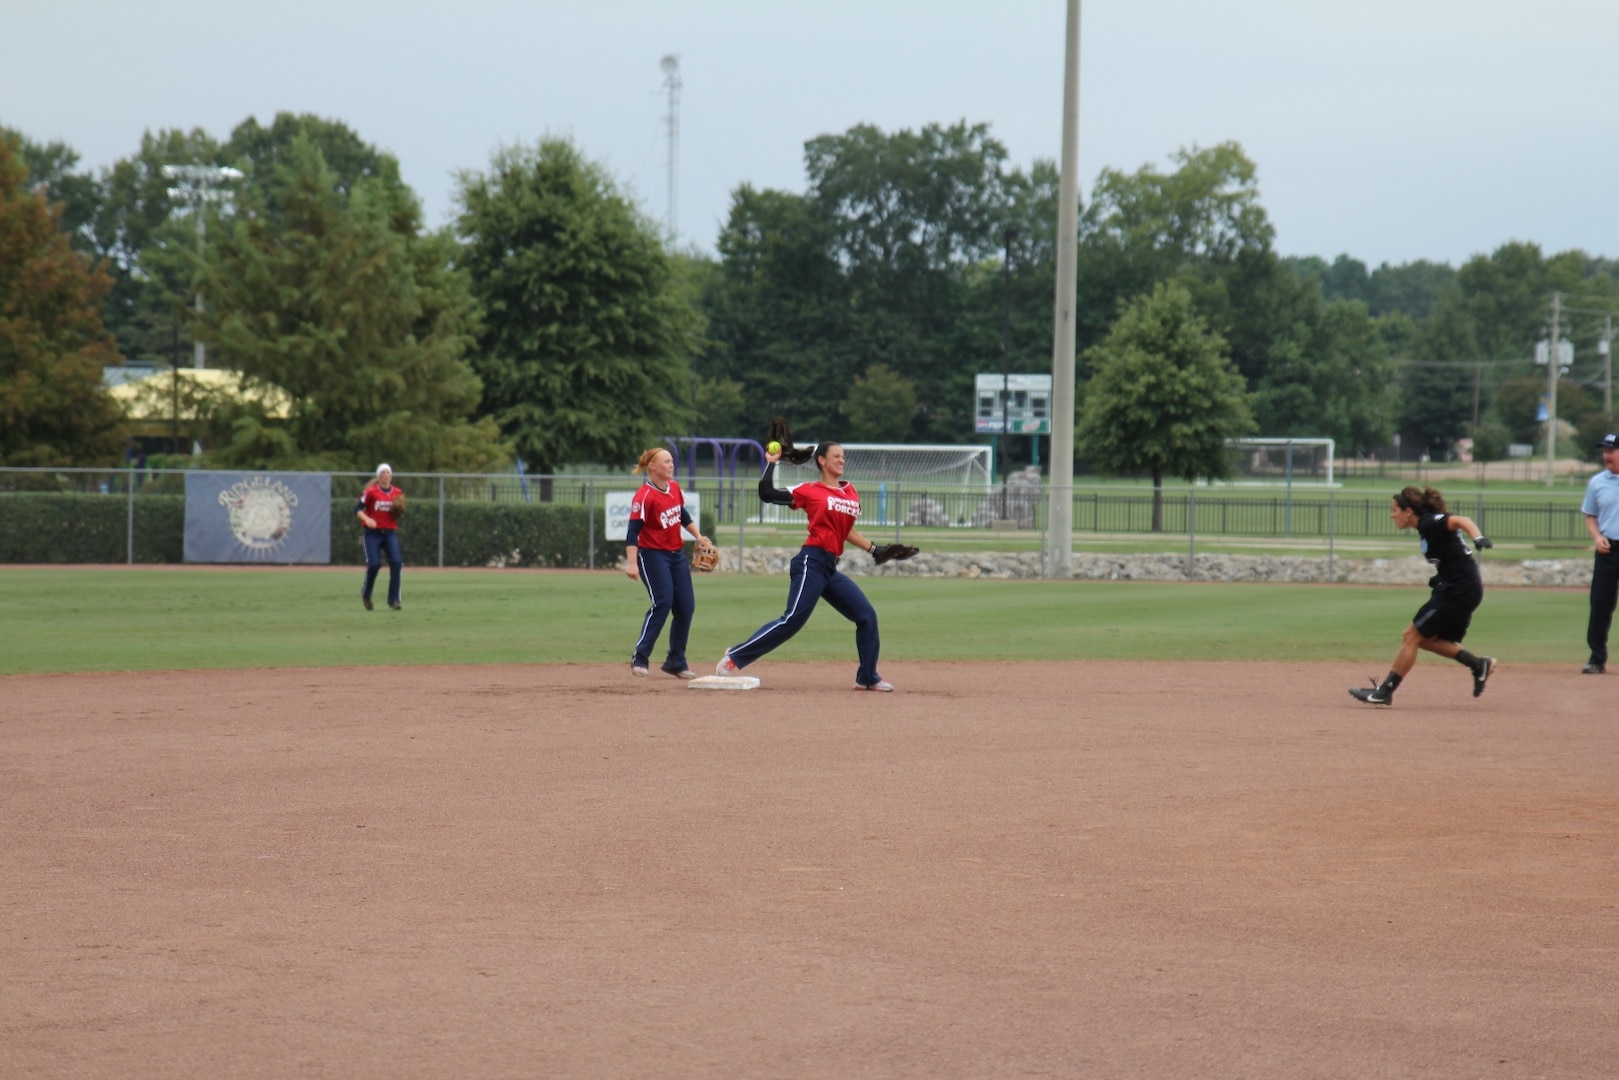 MA3 Shasta Rodriguez, Navy Operational Support Center, NC (Navy) (Center) with SPC Miranda Campbell, Camp Casey, Korea (Army) (left) turn a double play at the 2013 ASA National Softball Championship in Ridgeland, MS 26-30 September.  The Armed Forces Women took their 7th consecutive silver medal at the USA National Championship